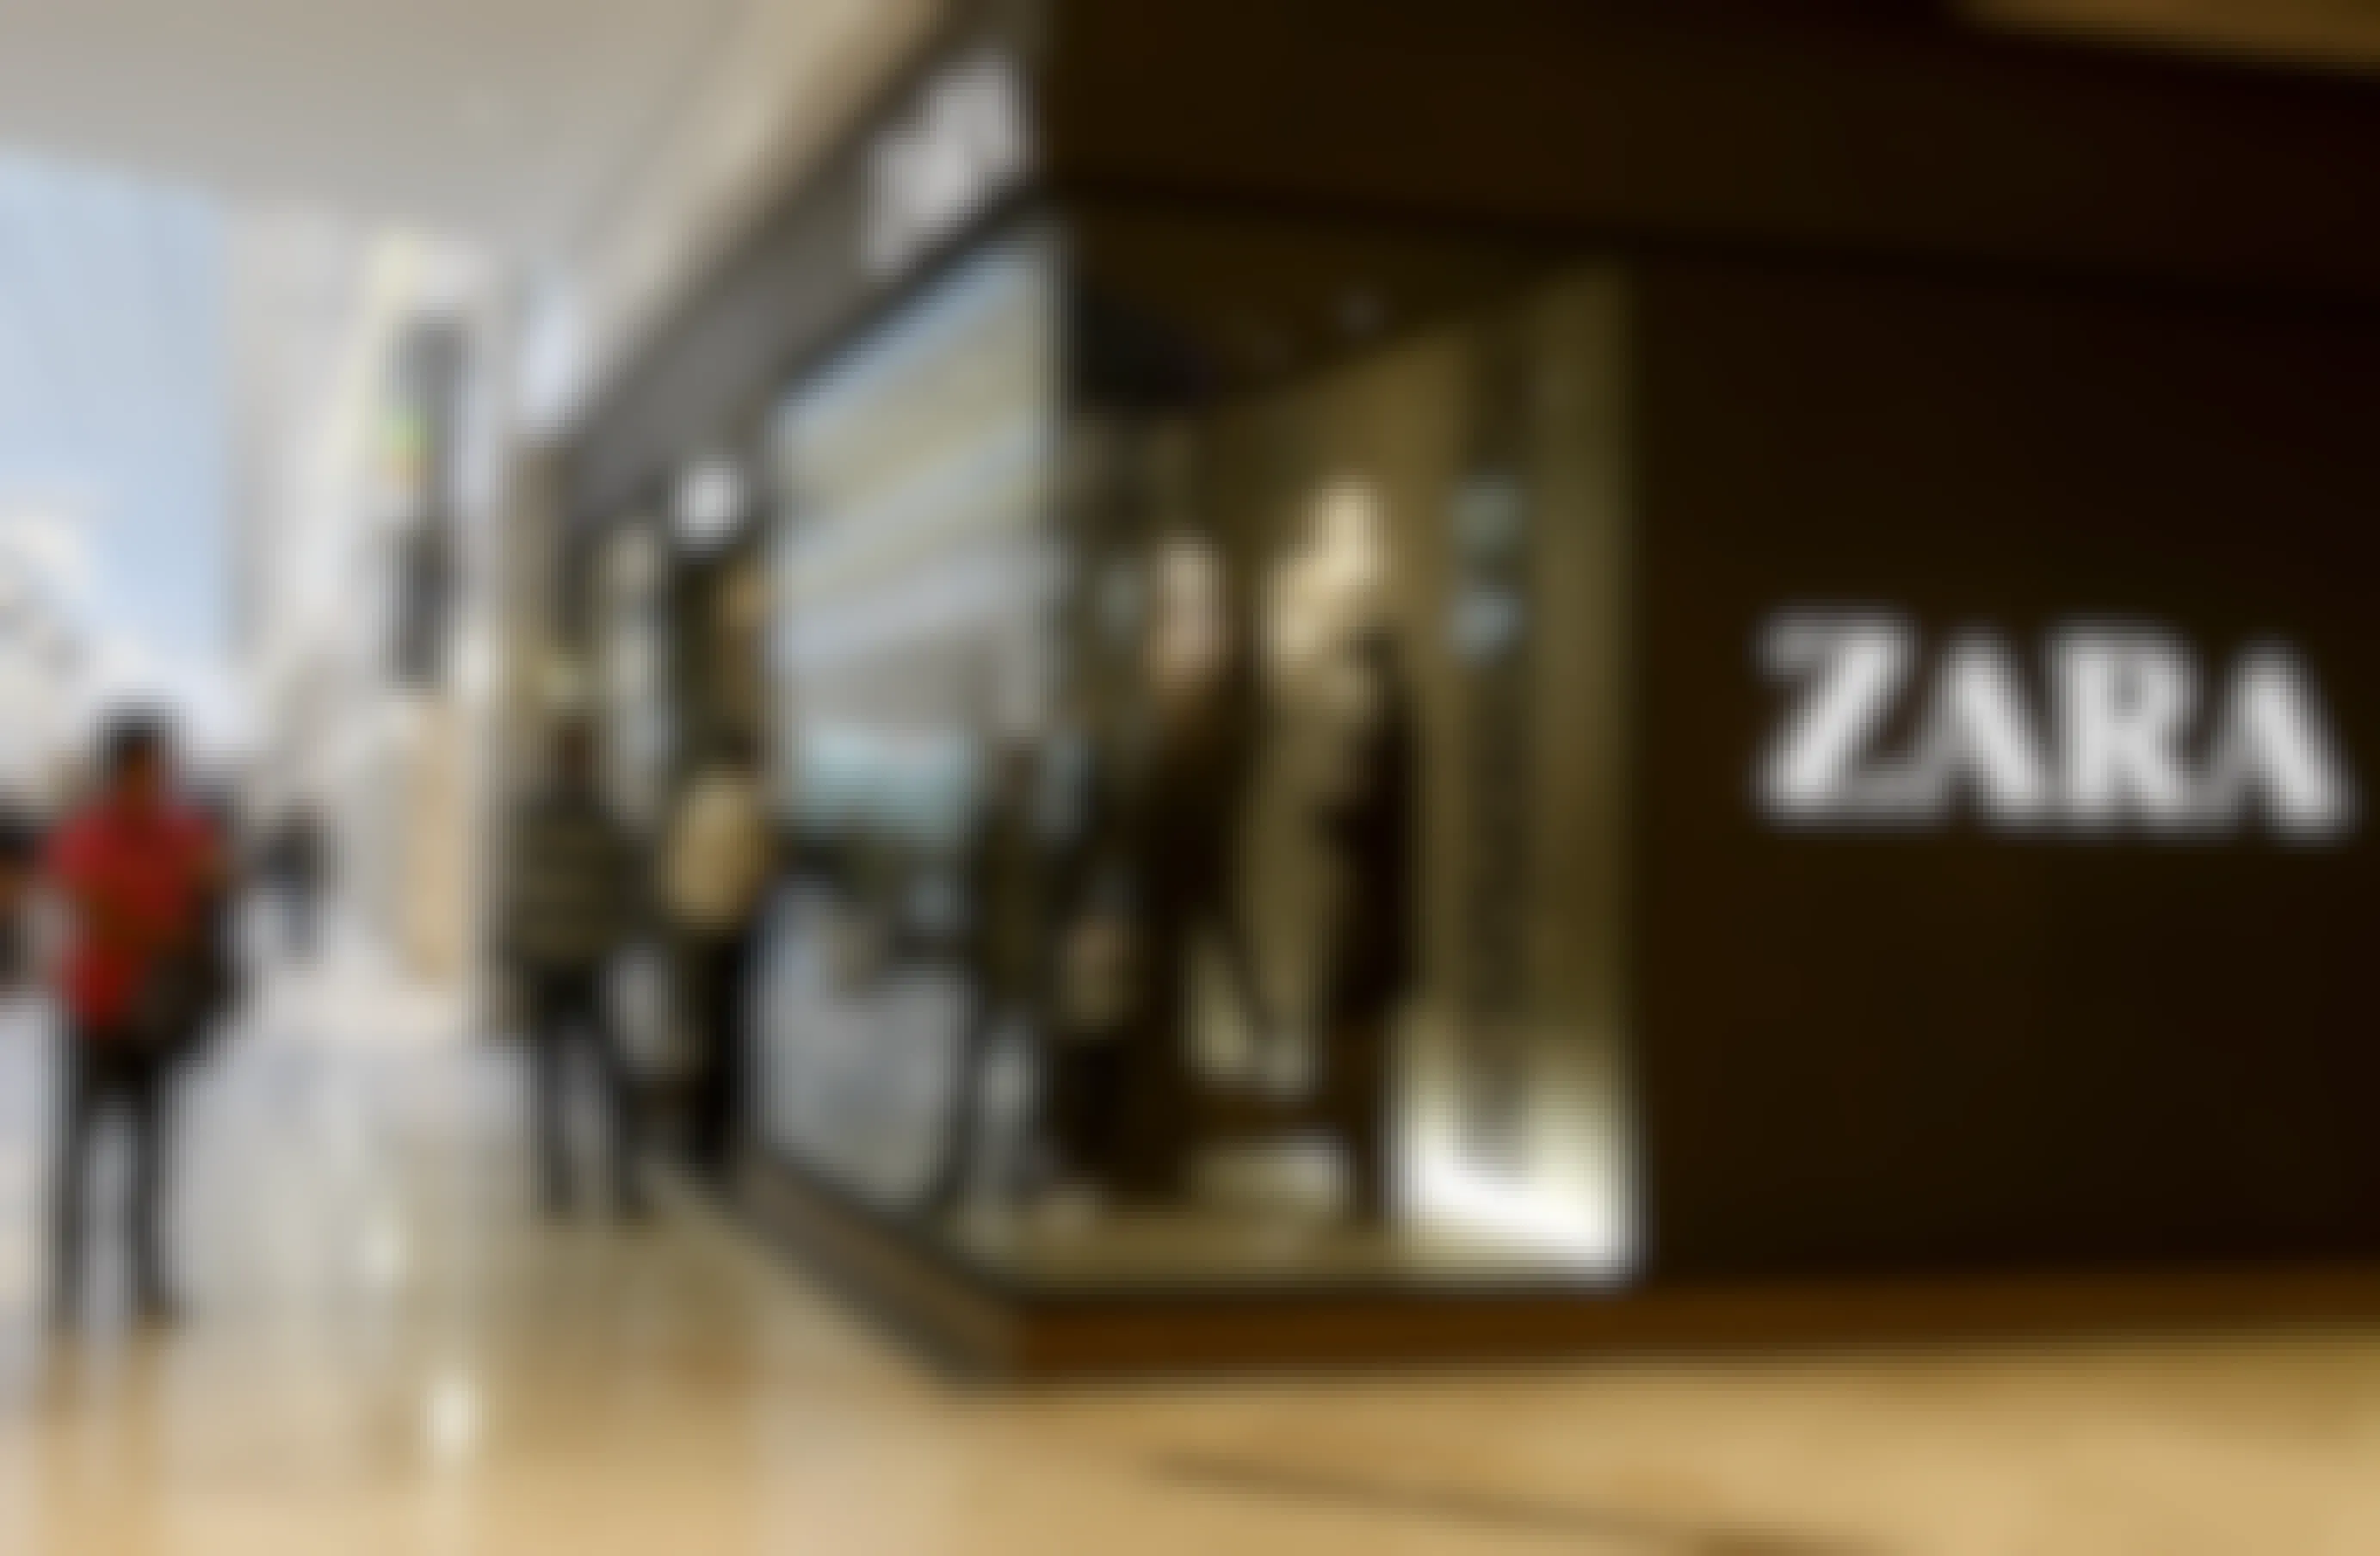 Zara Return Policy: Will More Stores Start Charging for Returns?